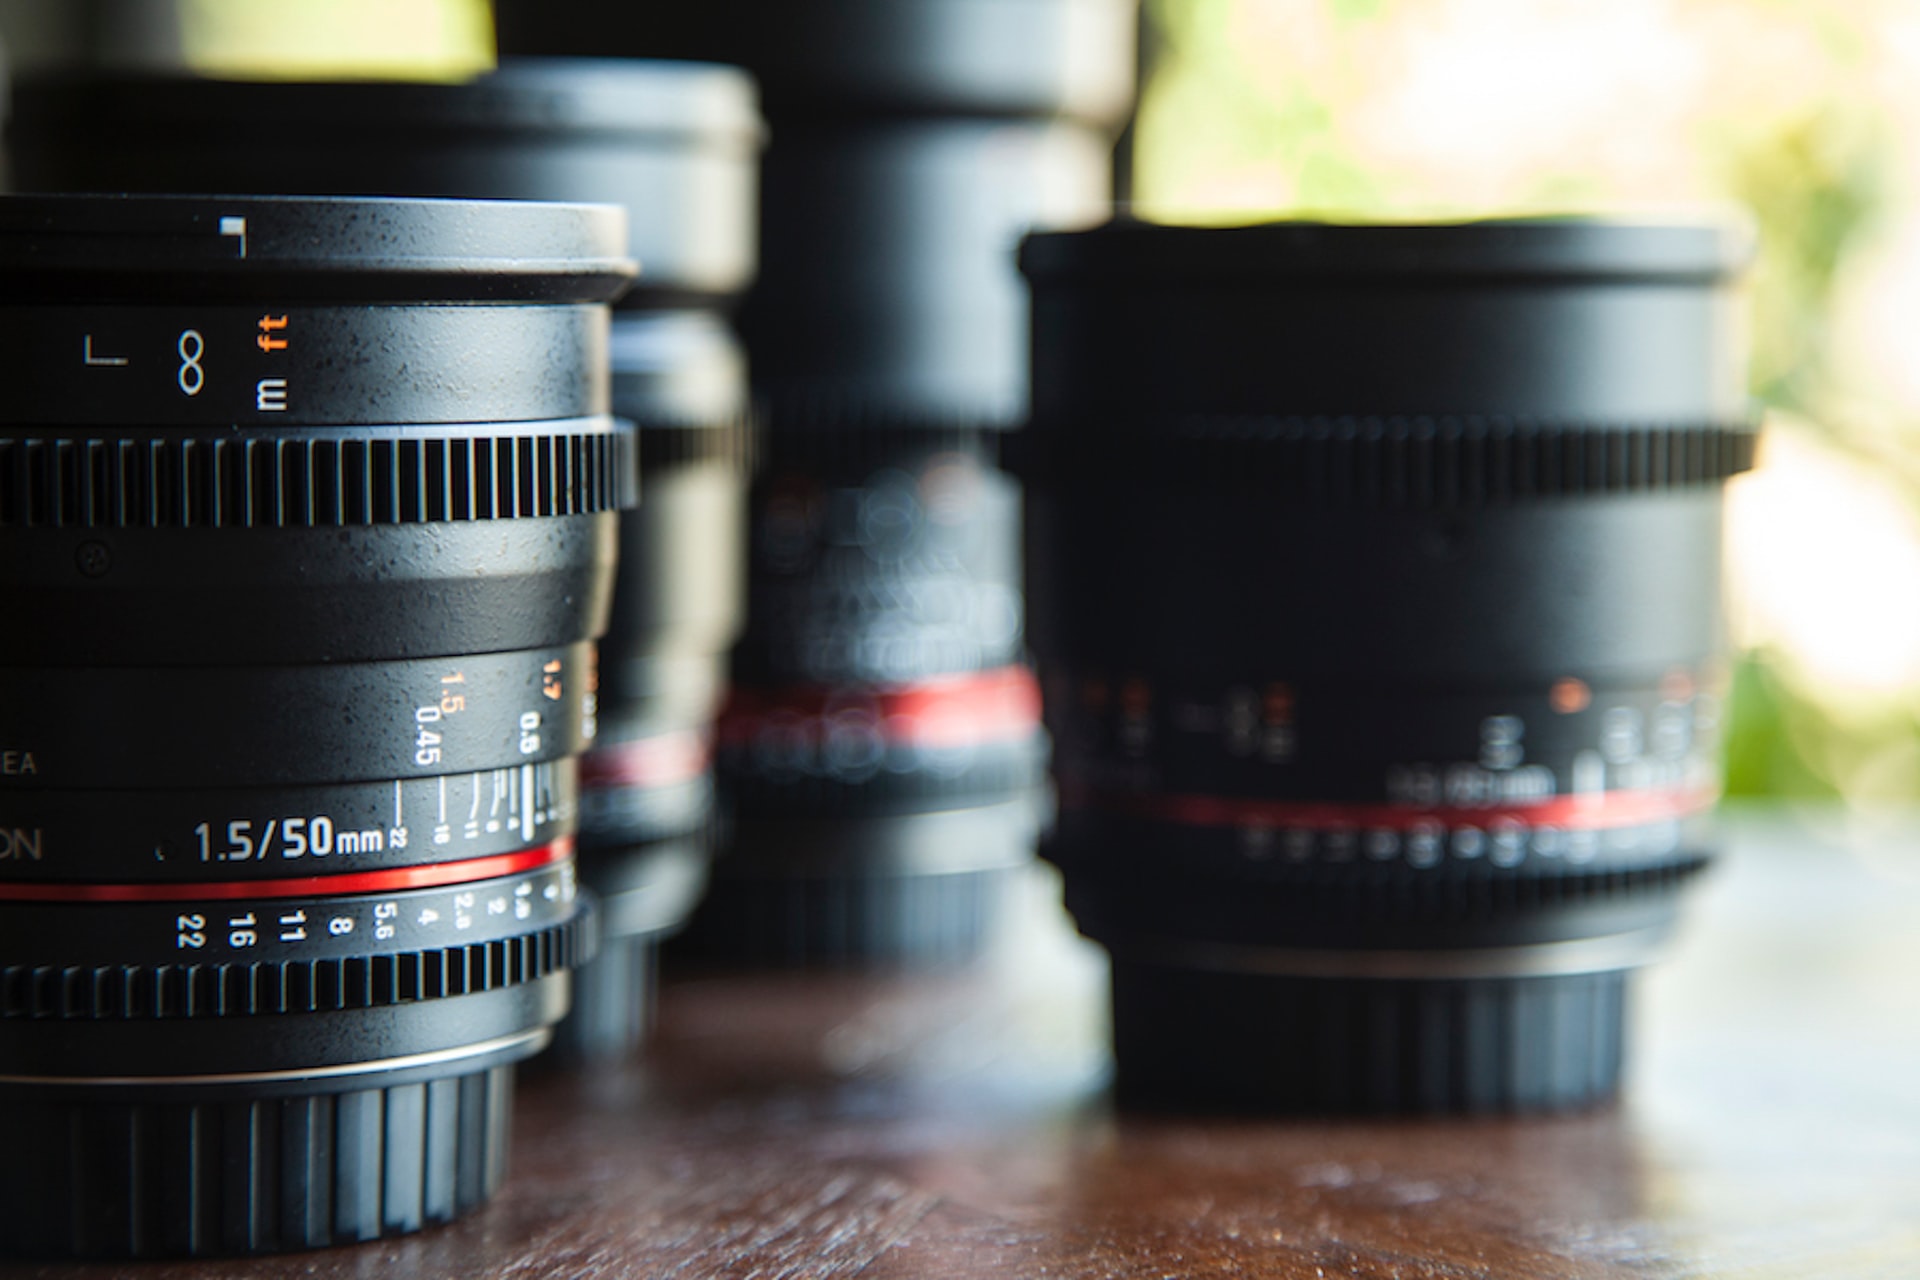 camera lenses on a wooden tabletop, plants in a blurred background